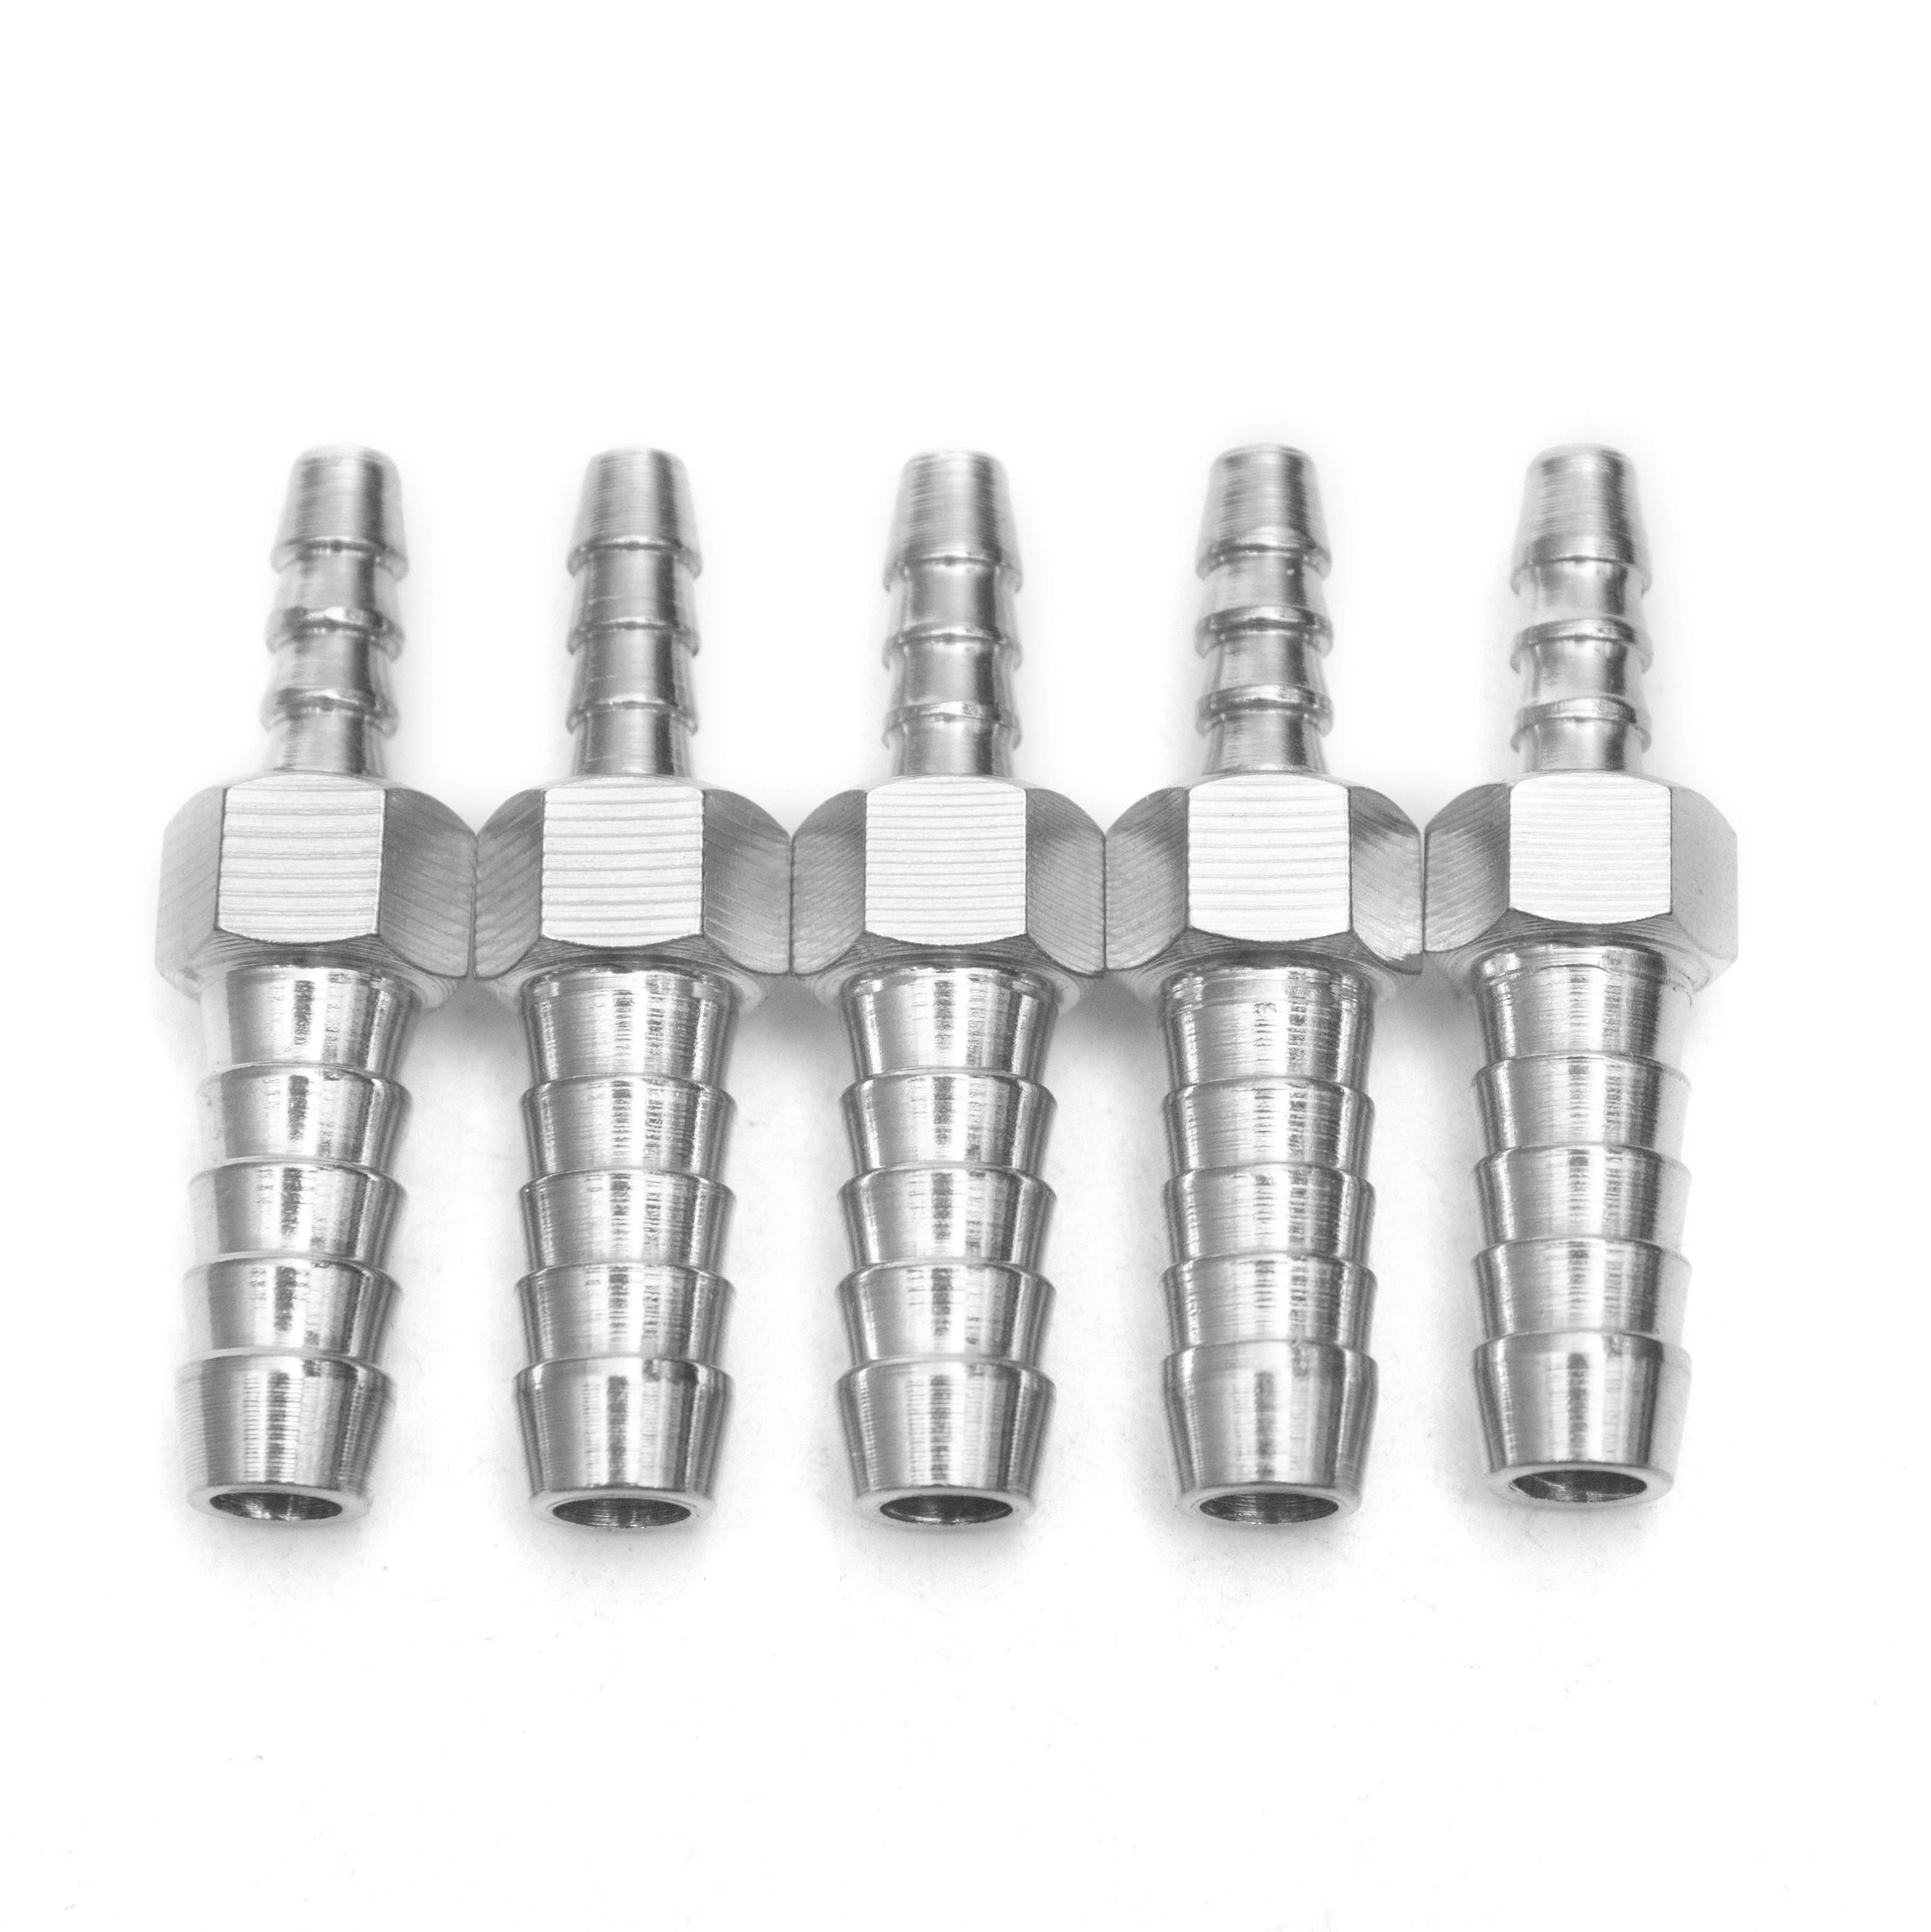 LTWFITTING Bar Production Stainless Steel 316 Barb Splicer Mender 1/4 Inch Hose ID x 1/8 Inch Hose ID Fitting Air Water Fuel Boat (Pack of 5)